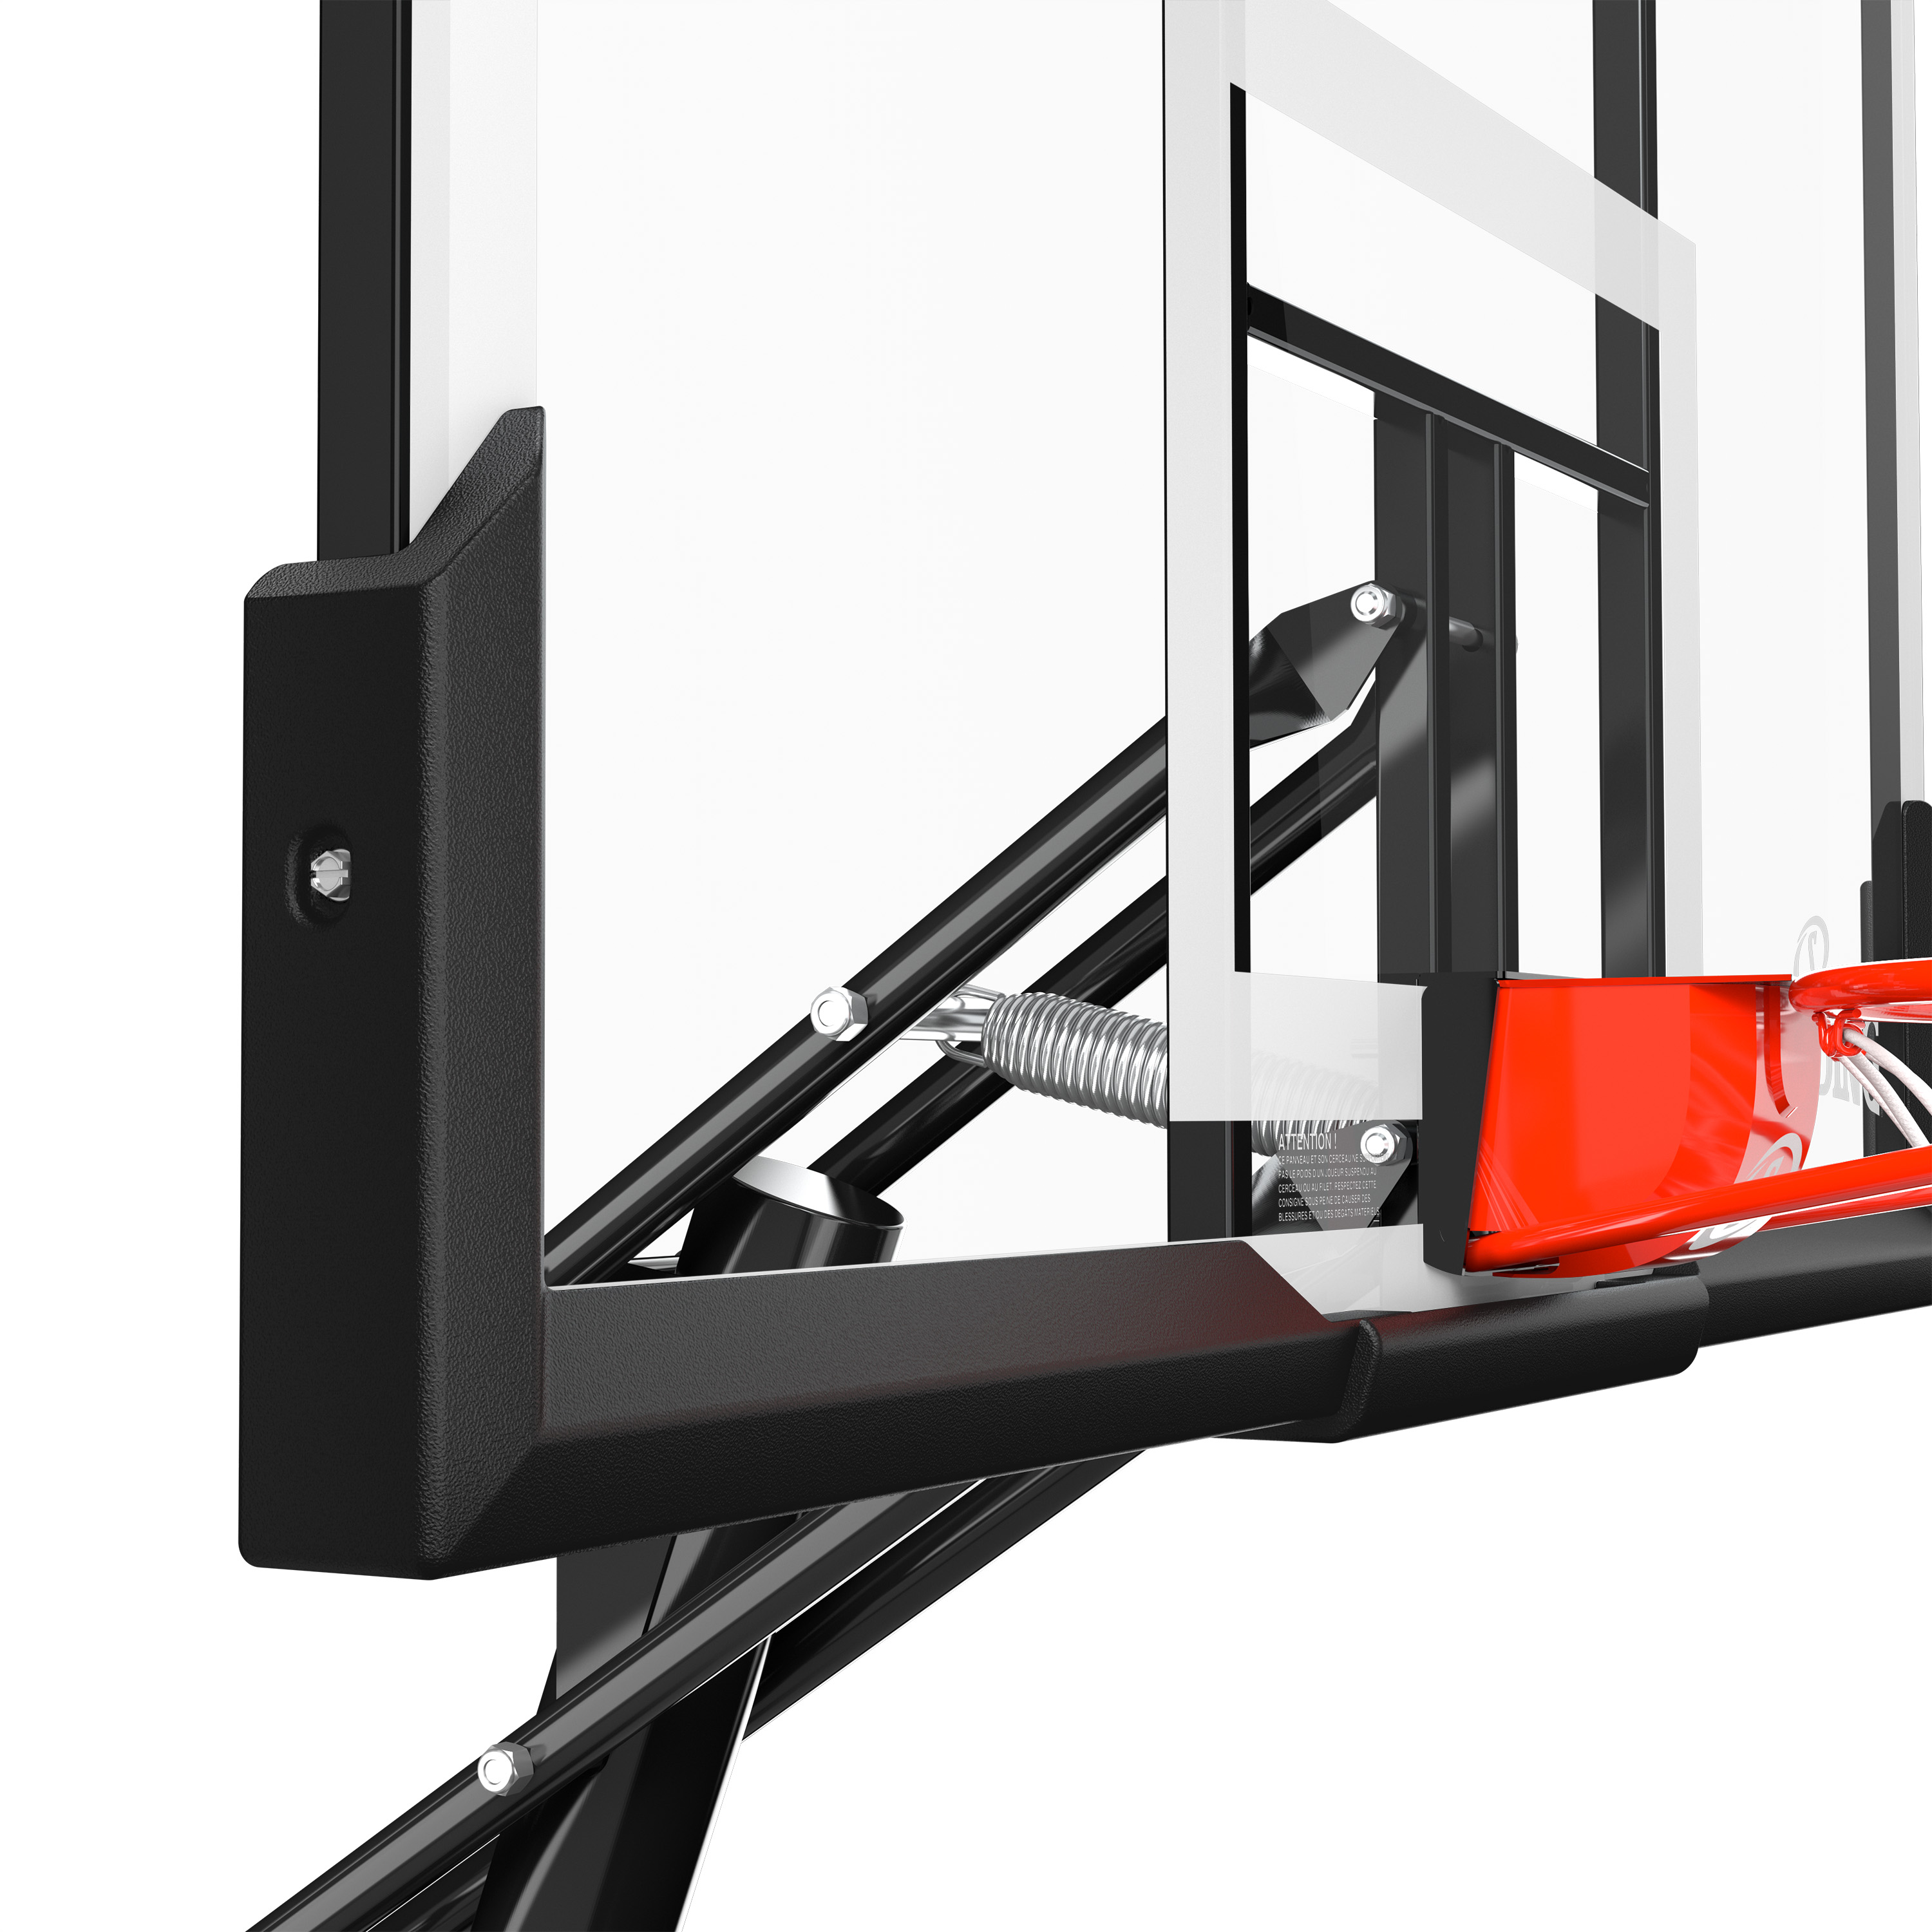 Spalding 54 inch Shatter-proof Polycarbonate Exacta Height® Portable Basketball Hoop System - image 7 of 12